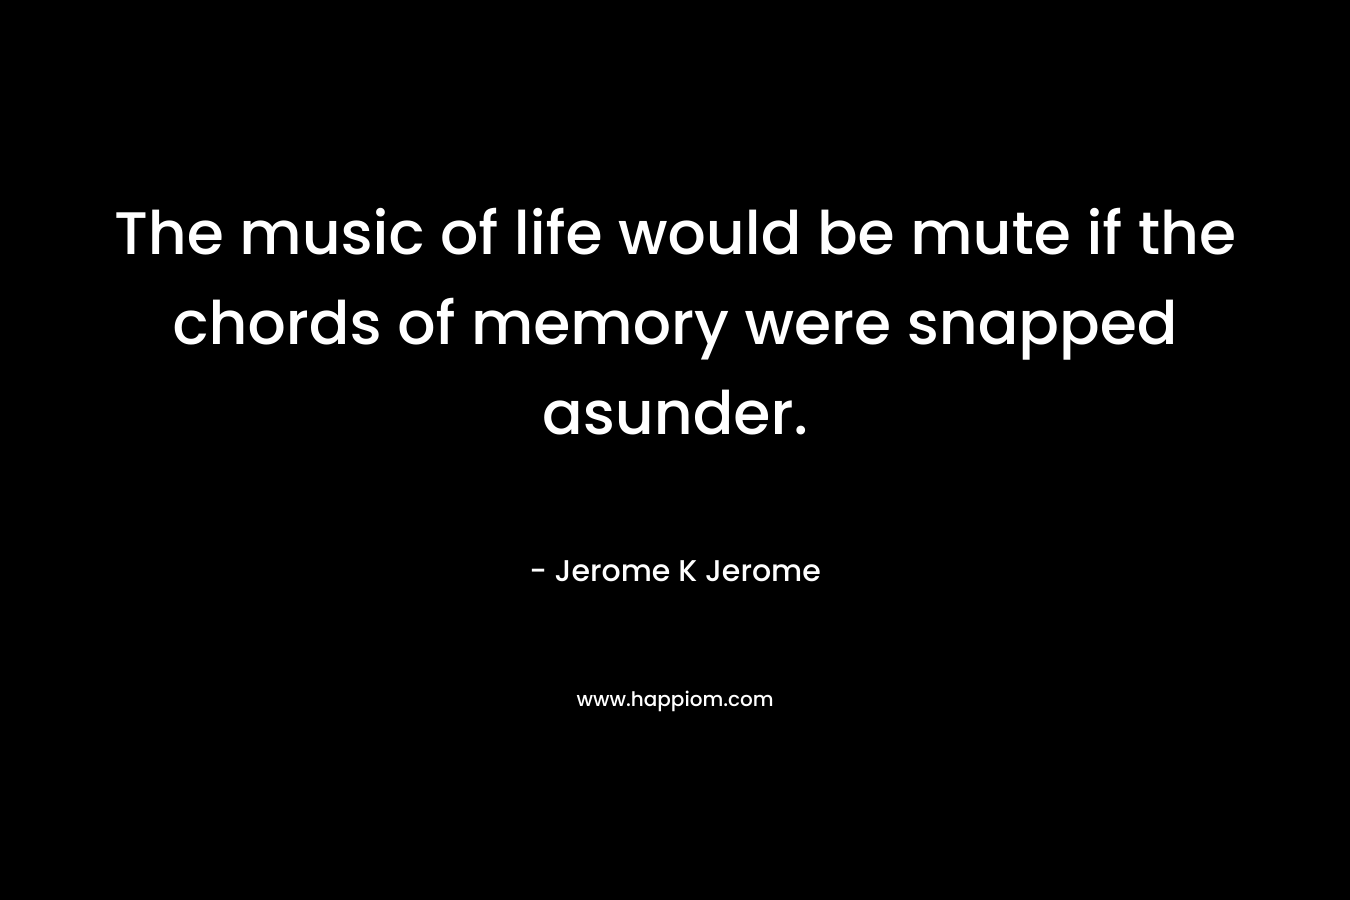 The music of life would be mute if the chords of memory were snapped asunder.